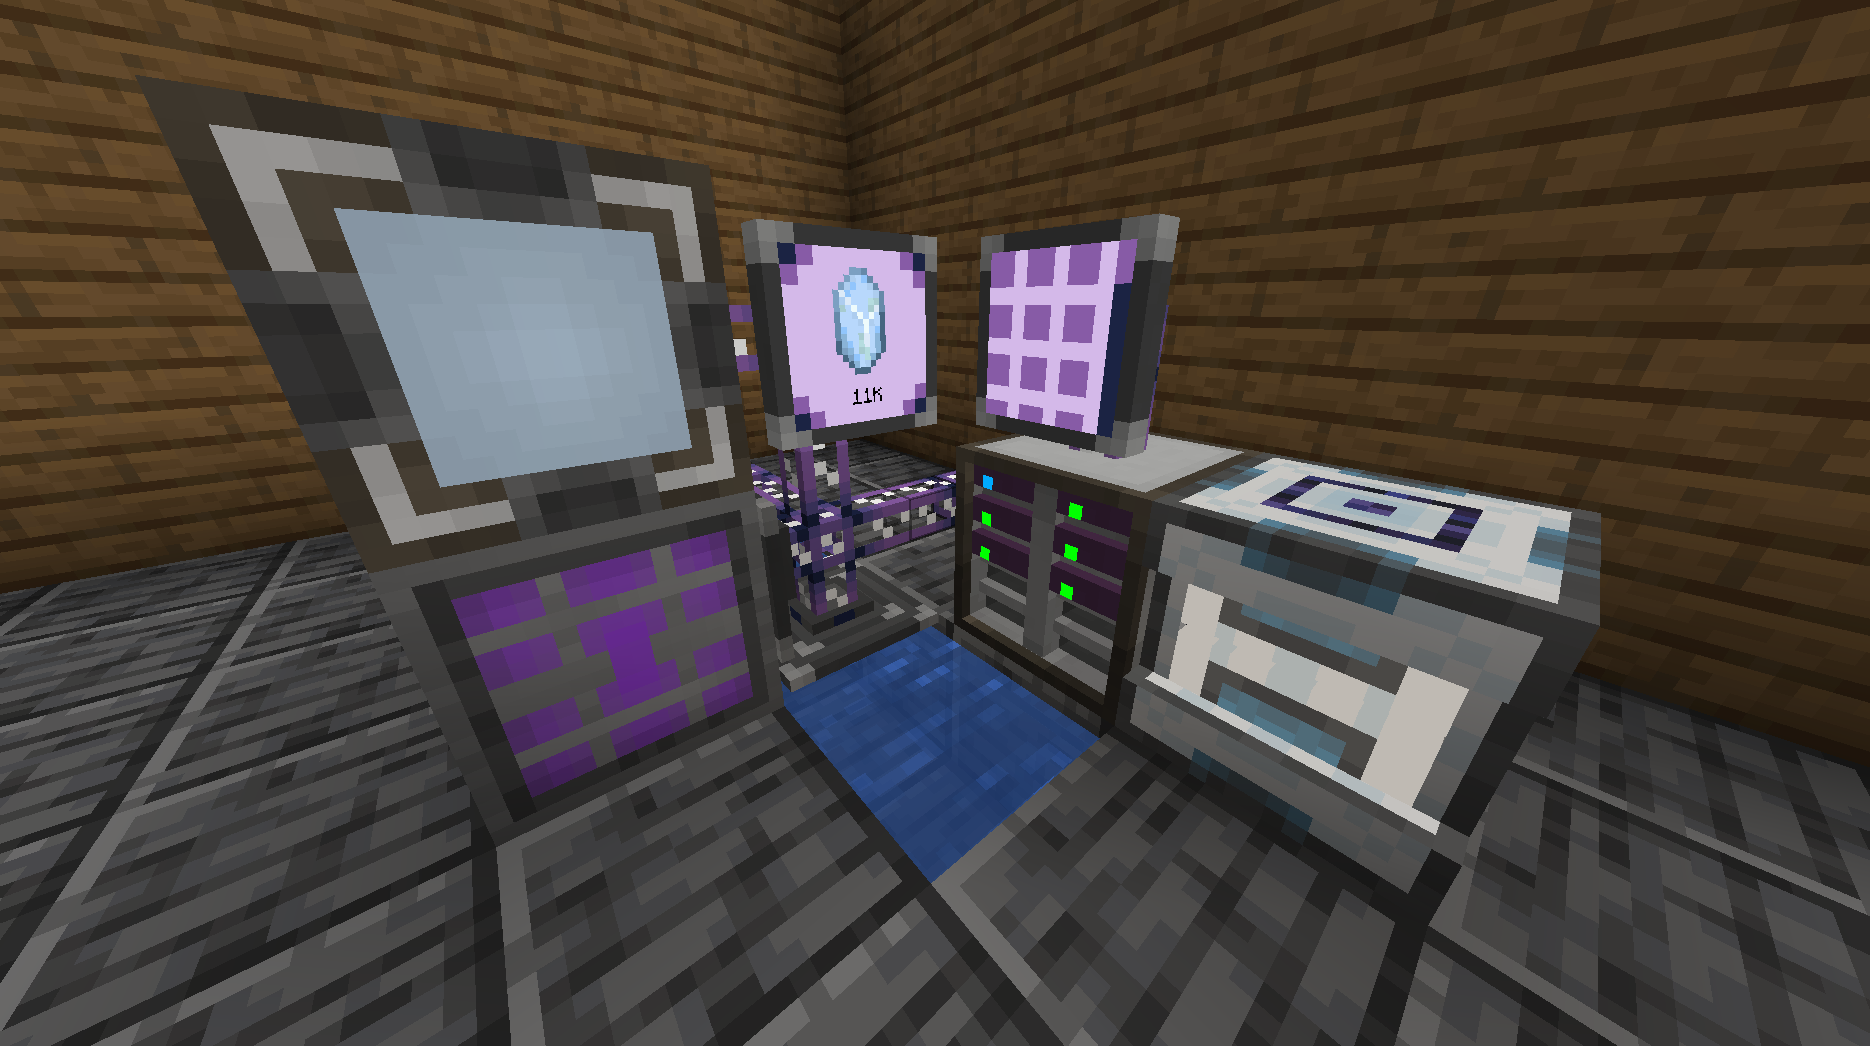 Advanced Inscriber, Crystal Growth Chamber and the DISKs - All in one picture.